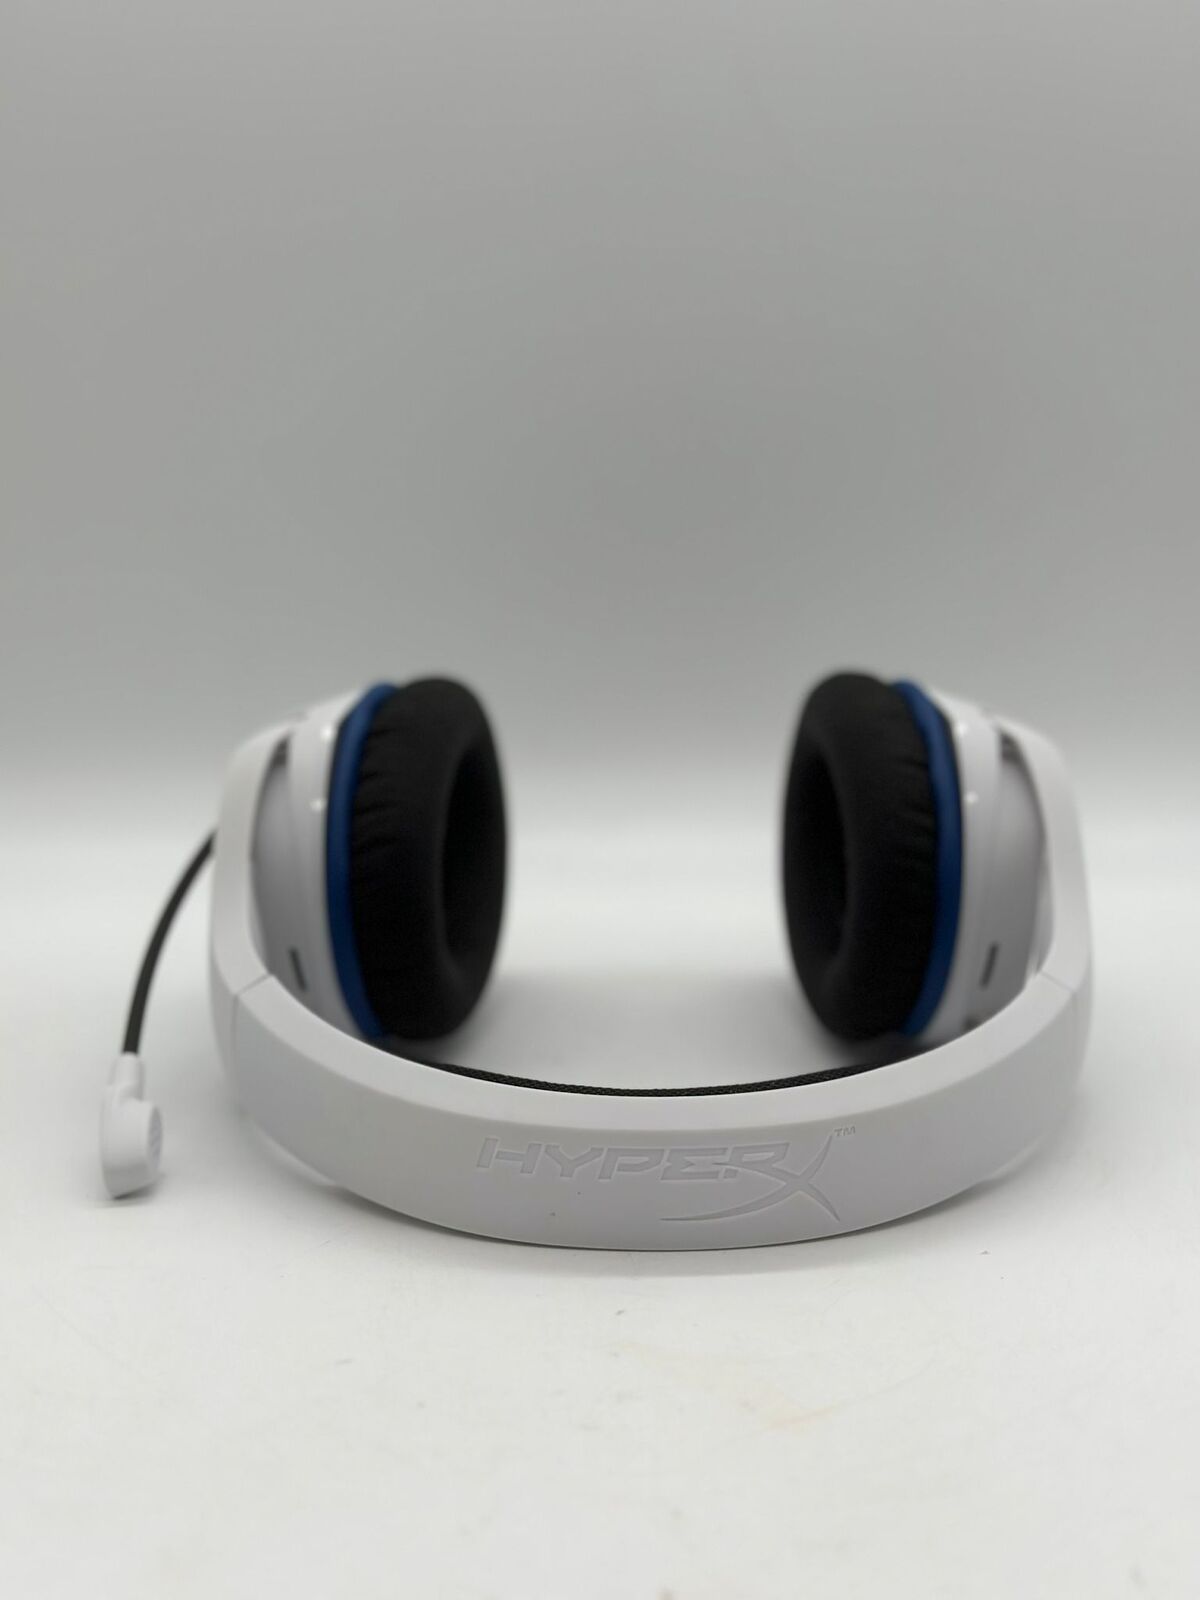 White (Pre-Owned) Headset Core Stinger HyperX Cloud Wireless Gaming